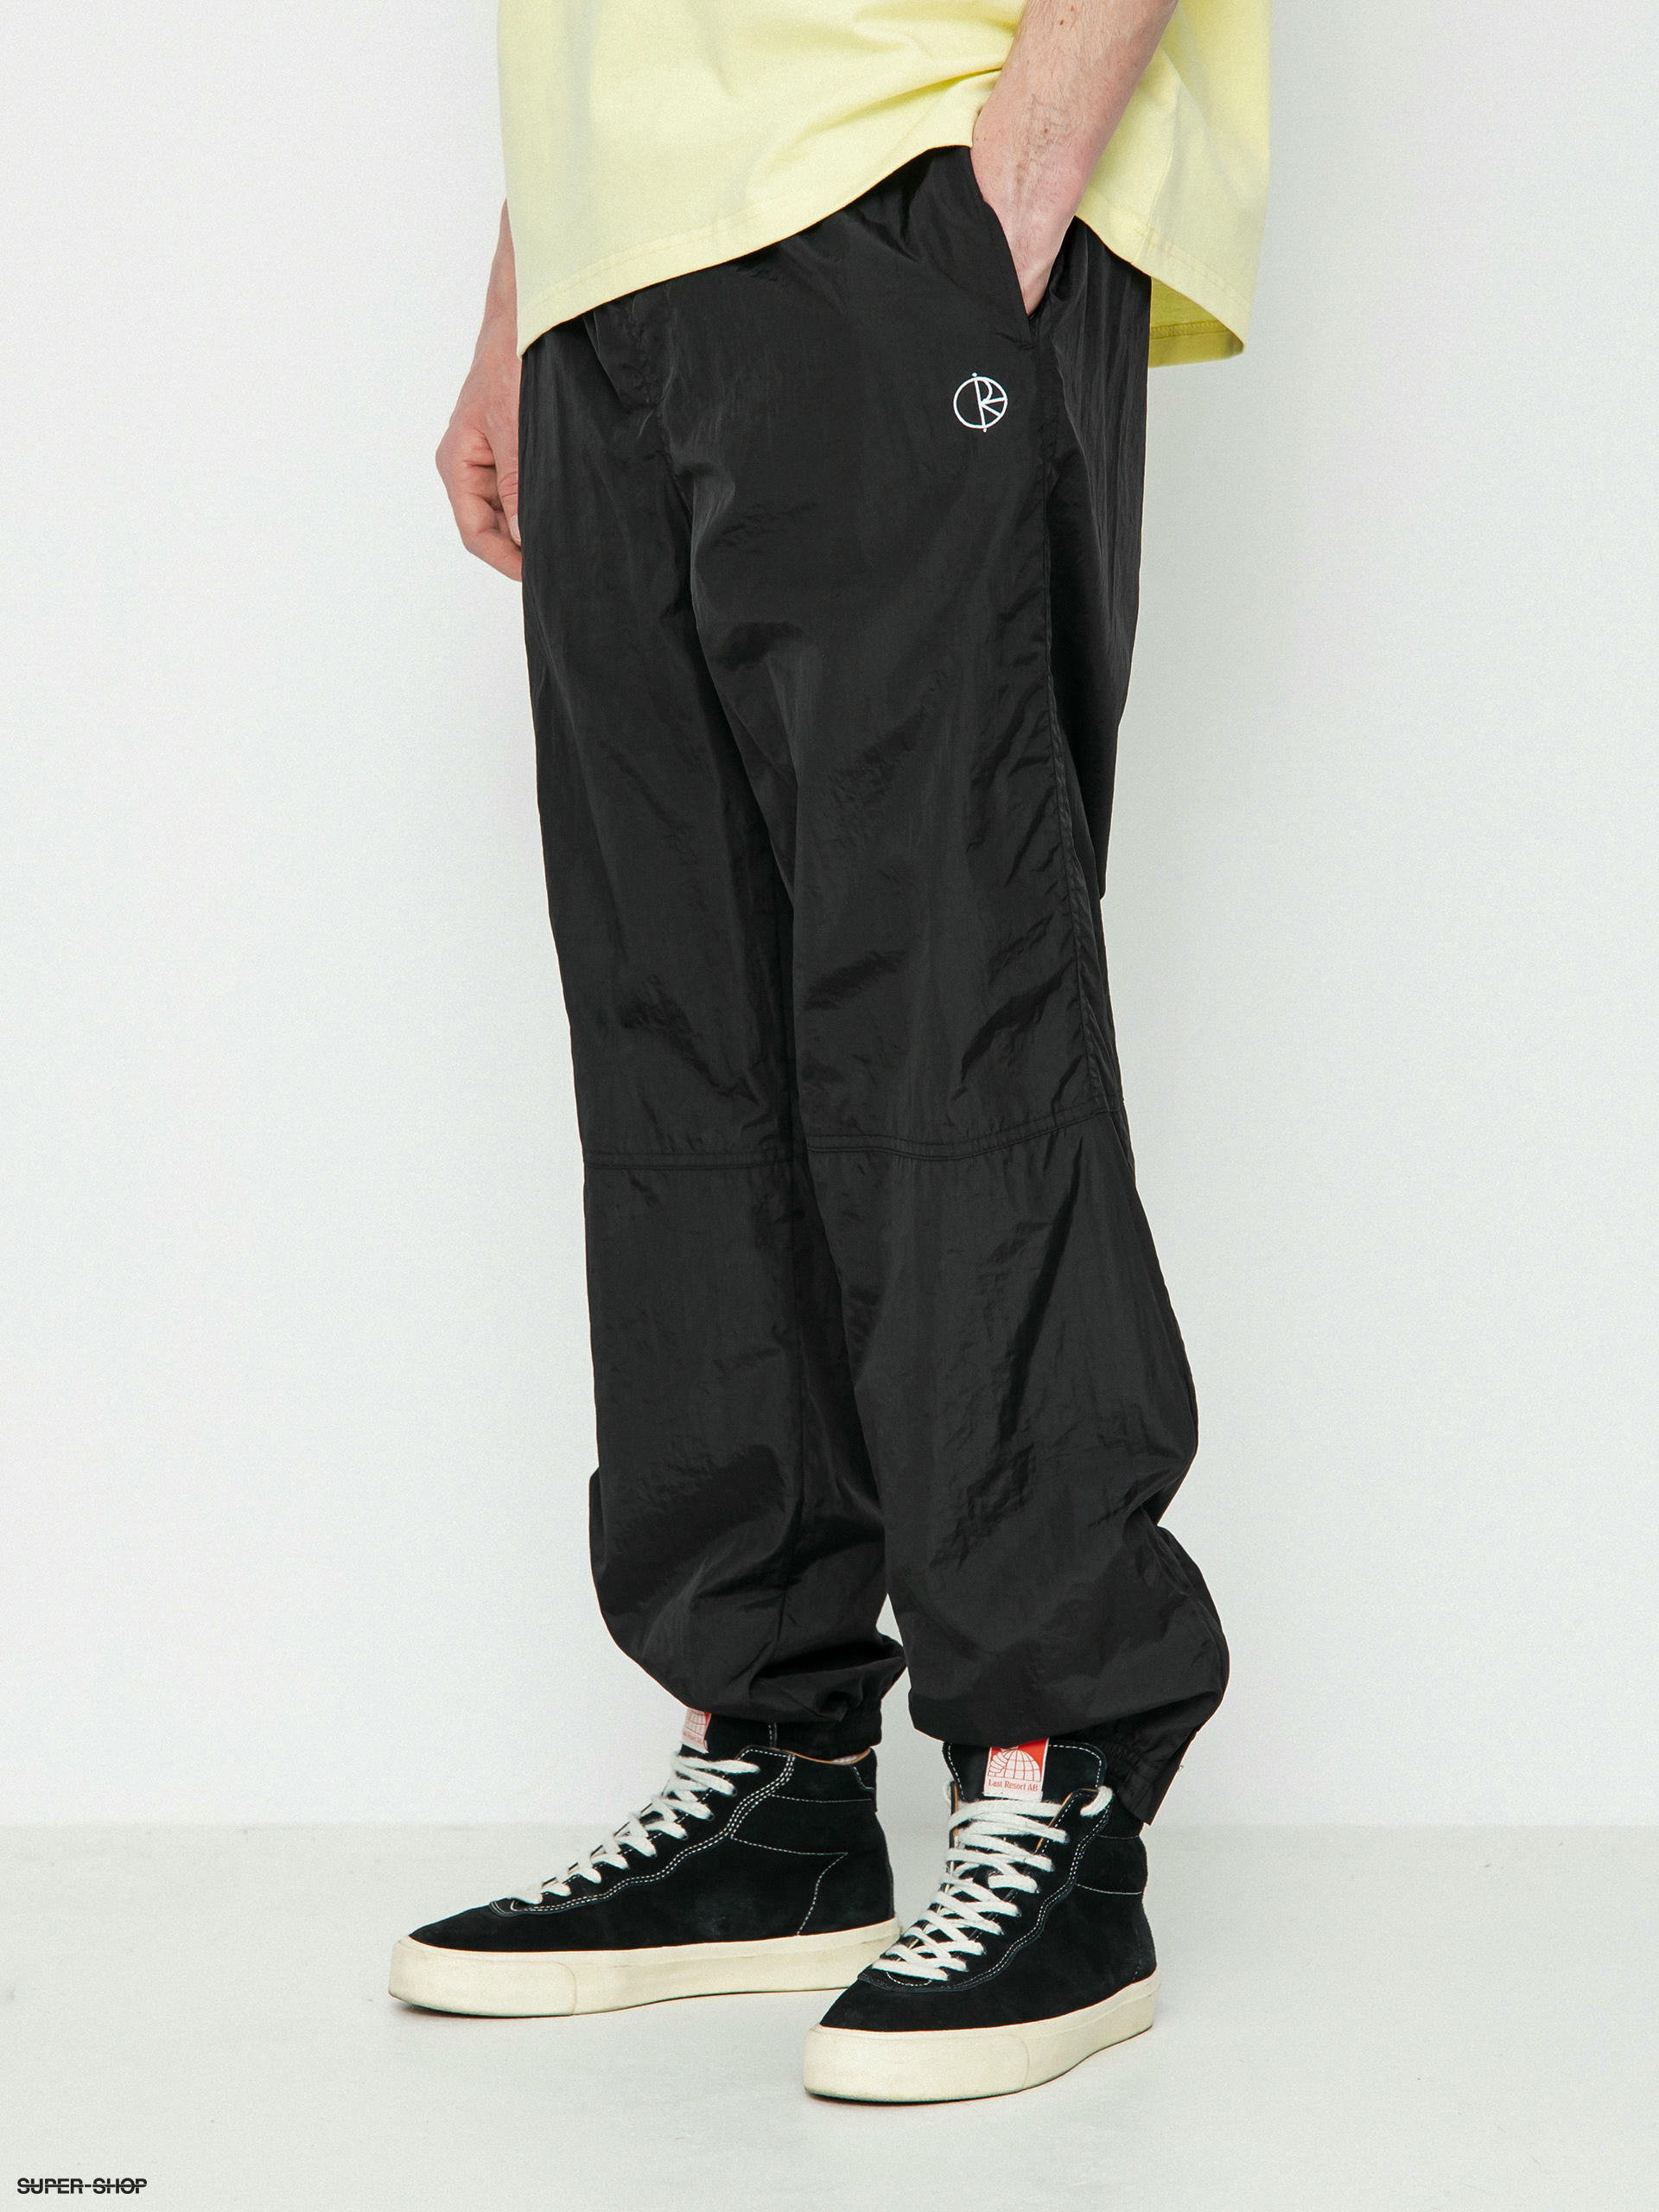 Parachute Material Joggers Track Pants Lower  Rawedge Uniforms